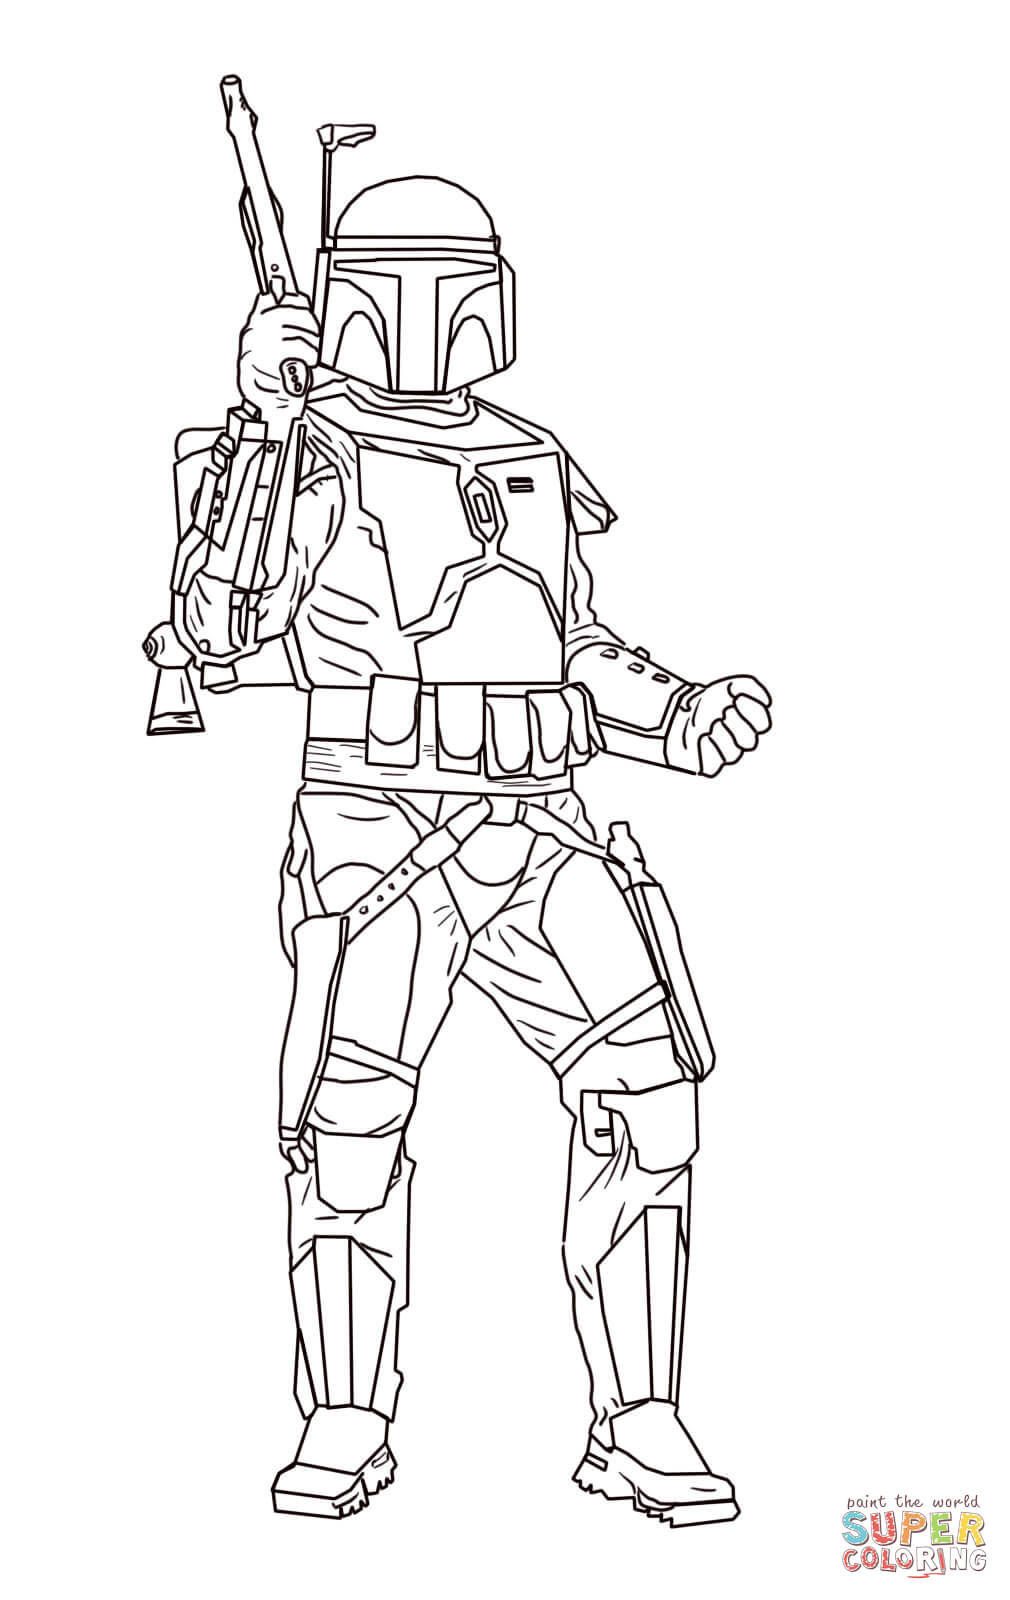 Jango Fett coloring page | Free Printable Coloring Pages